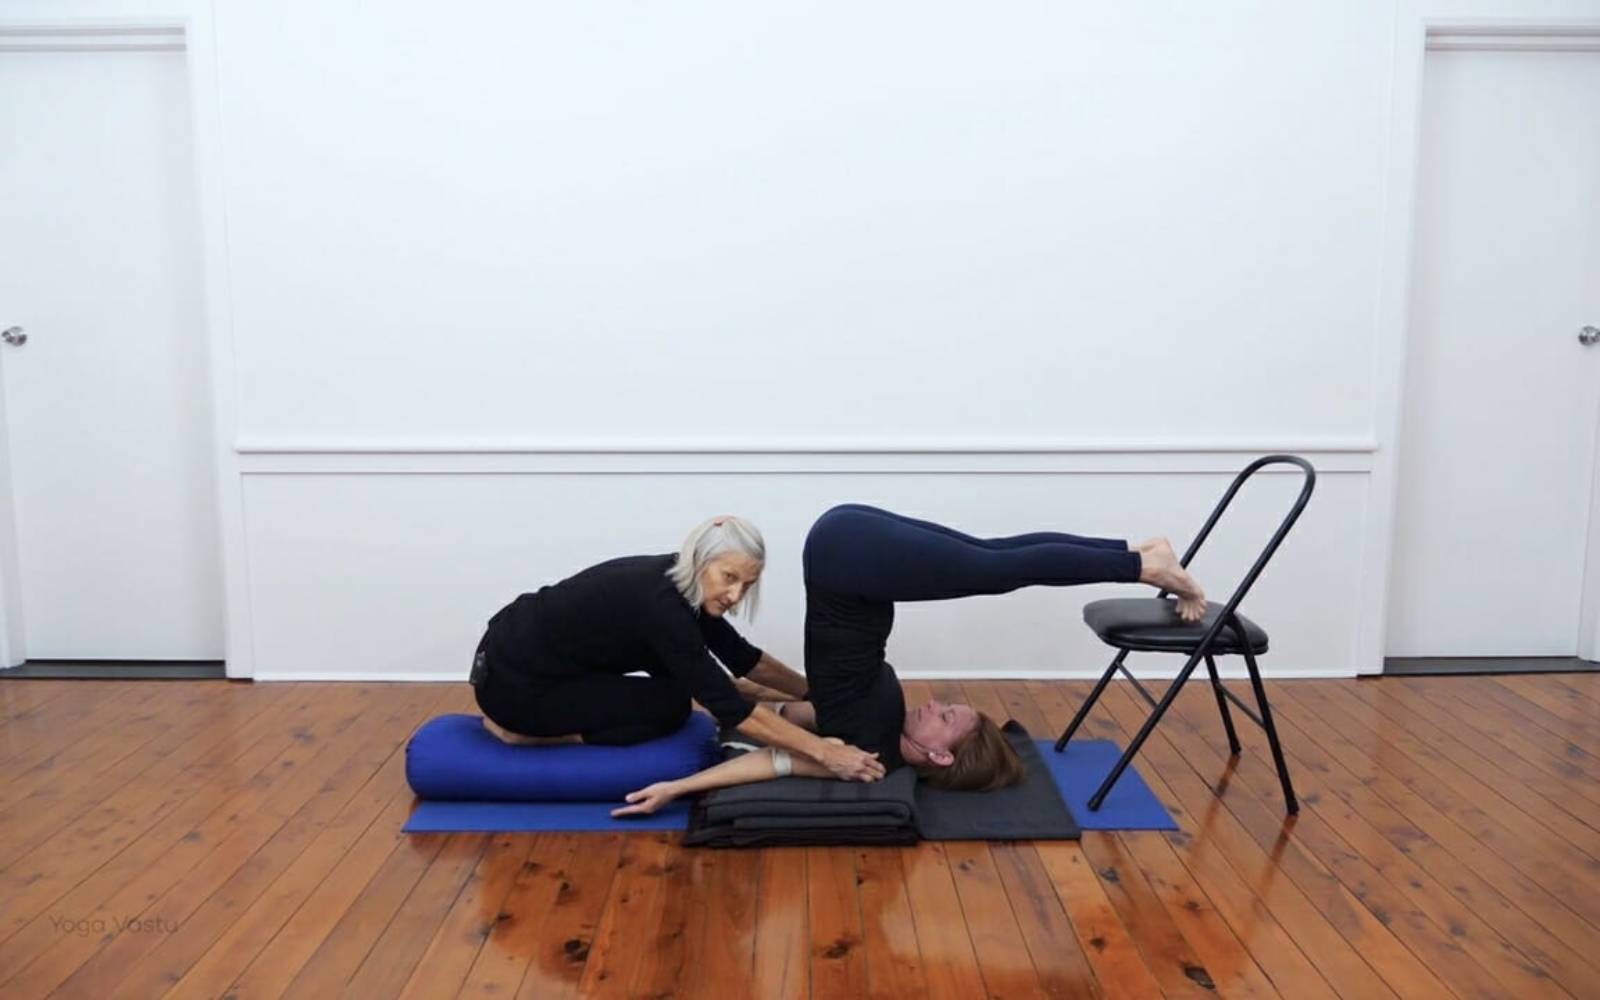 Restorative Yoga Poses: Calm Your Body and Mind - Yoga Journal